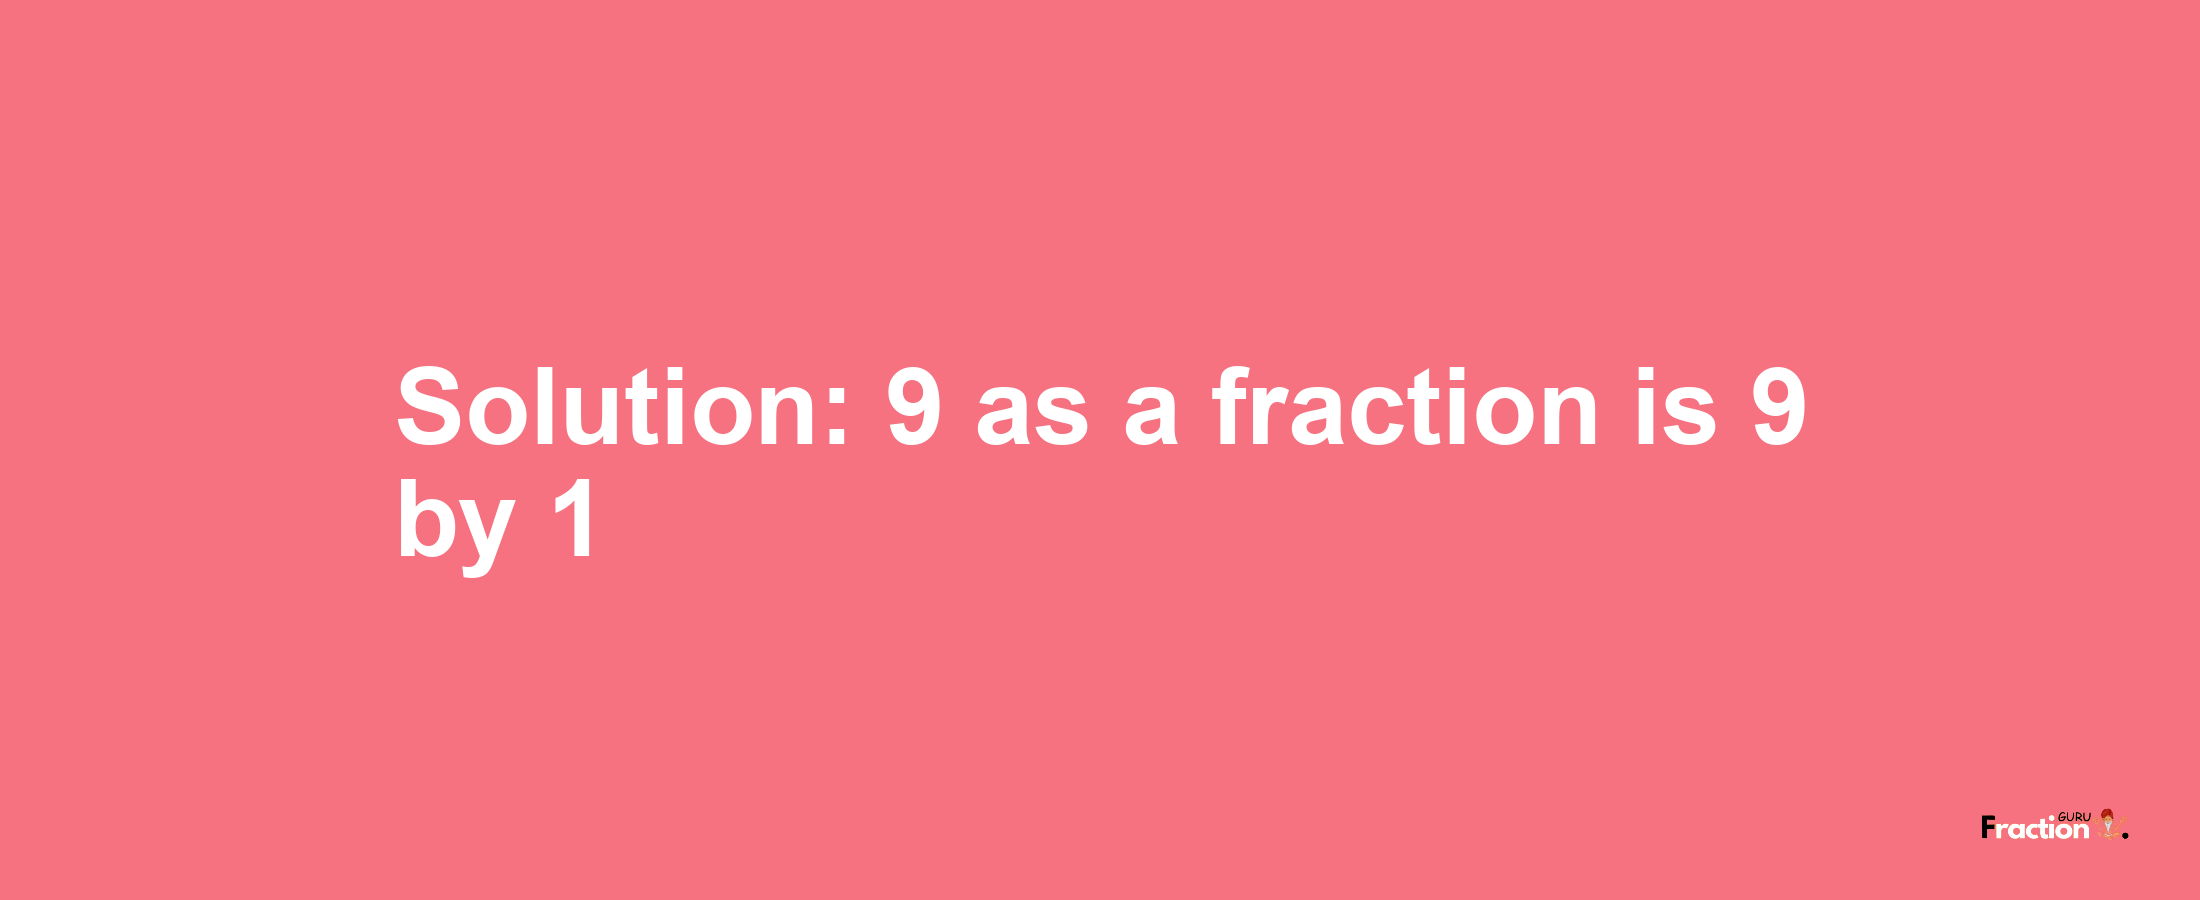 Solution:9 as a fraction is 9/1